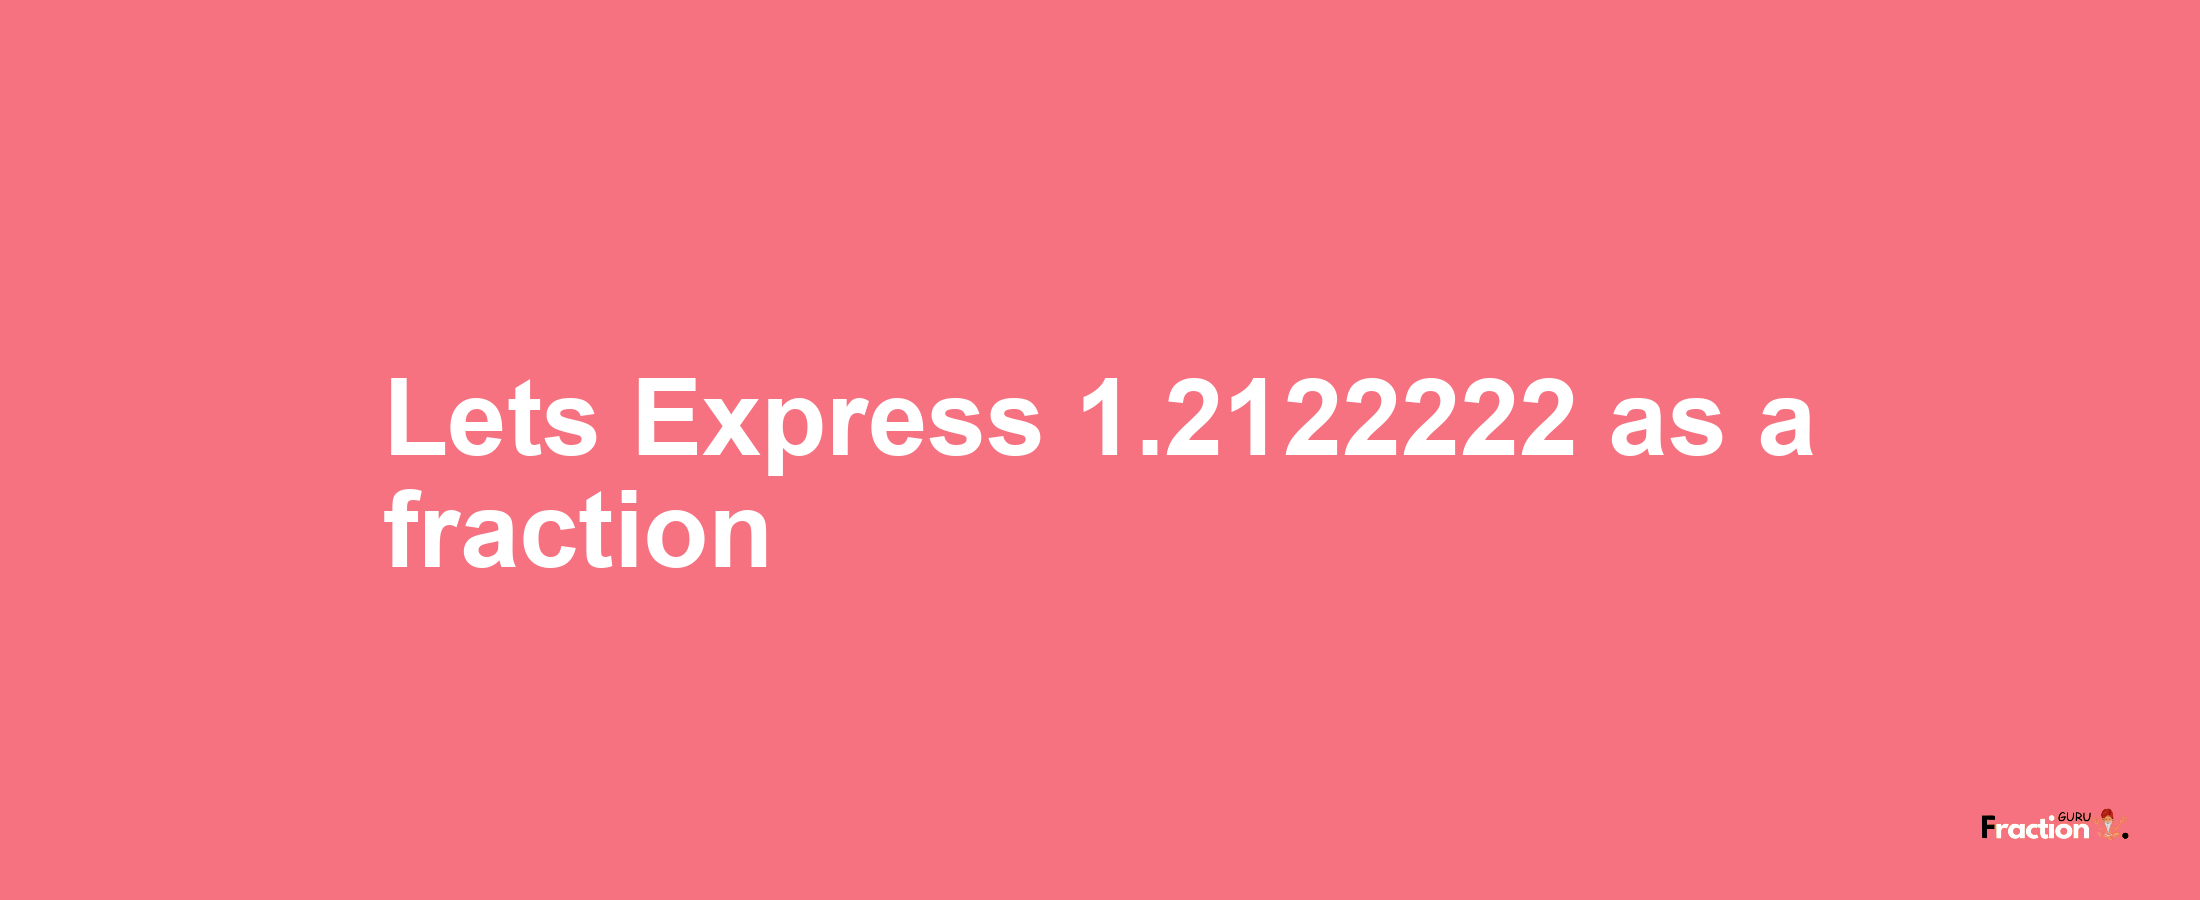 Lets Express 1.2122222 as afraction